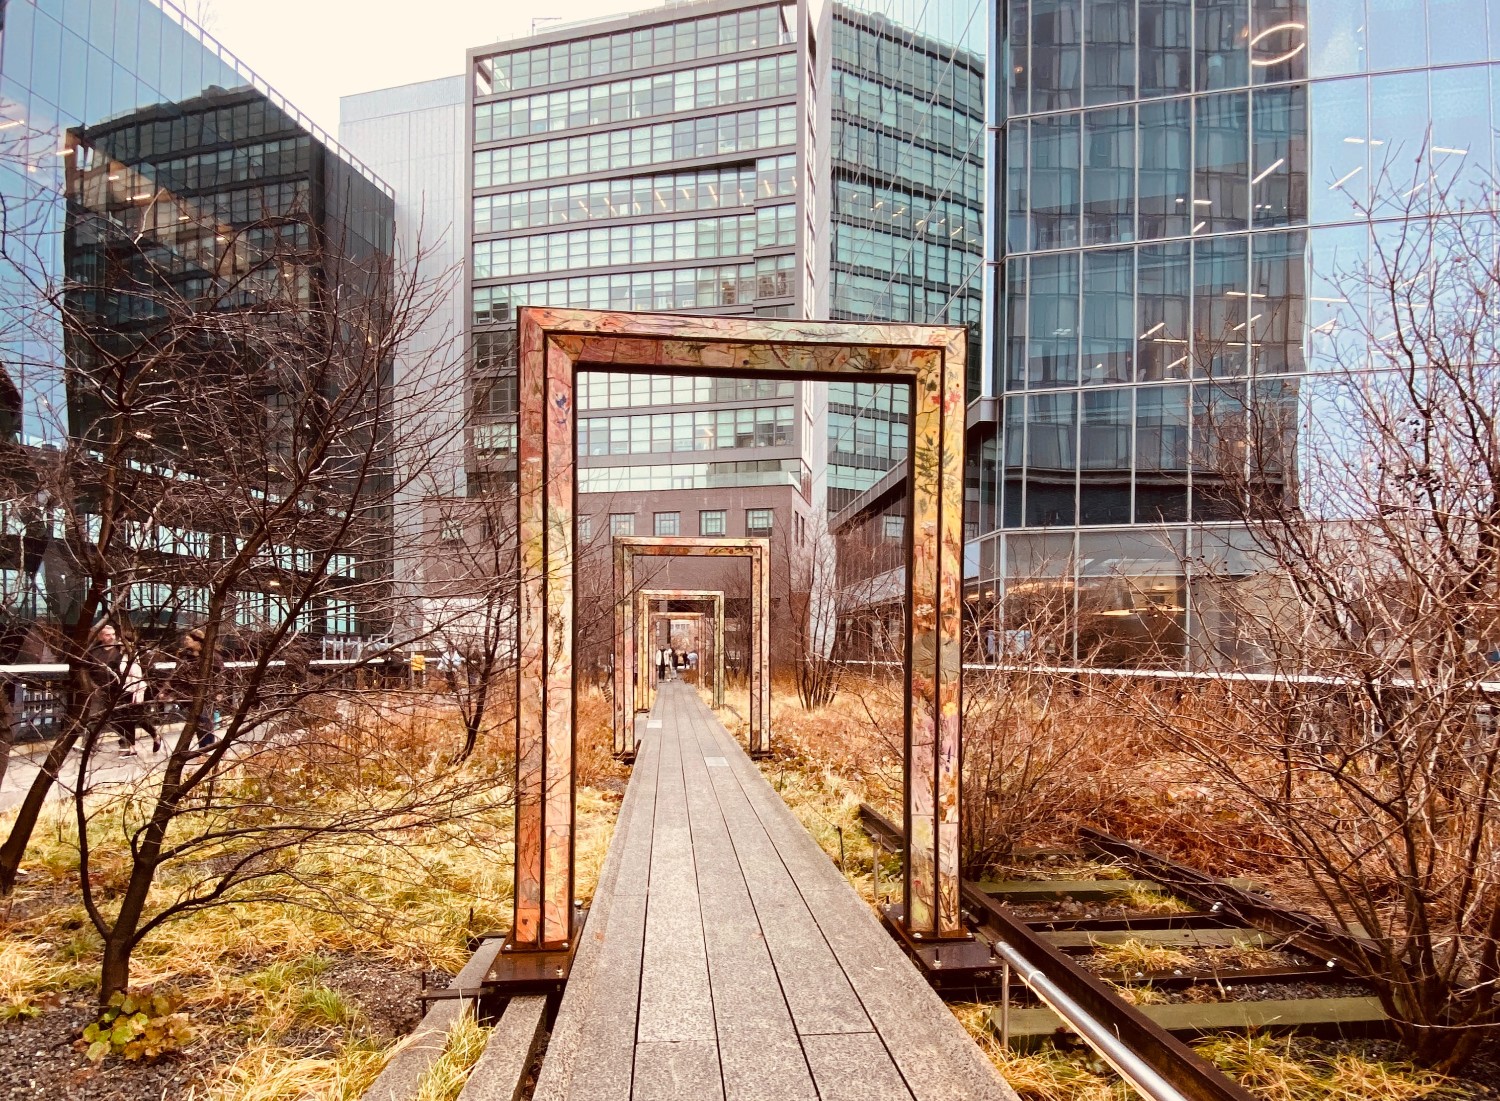 A Guide to the High Line in New York City